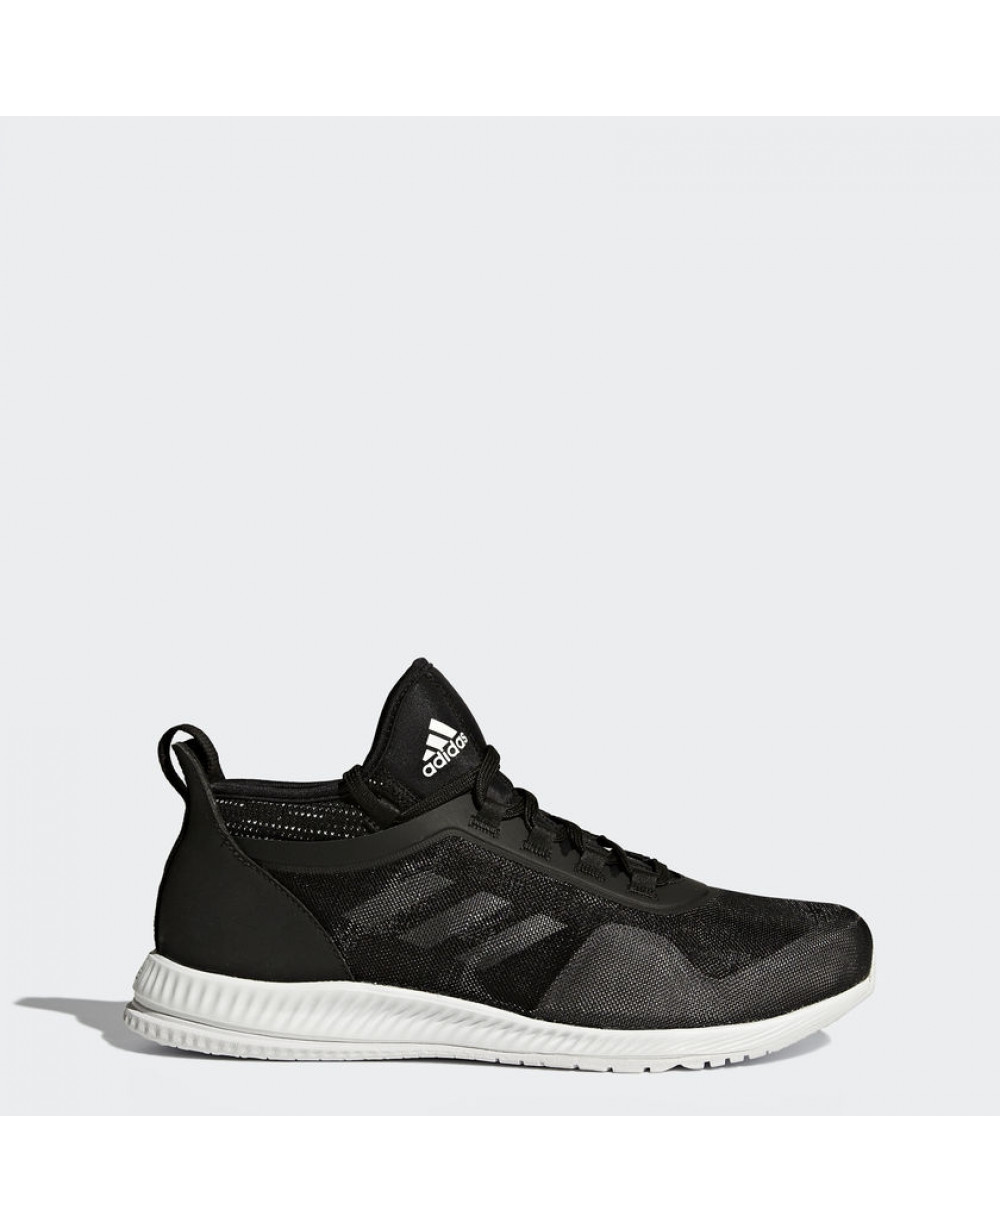 Adidas Gymbreaker 2 Training Shoes For 